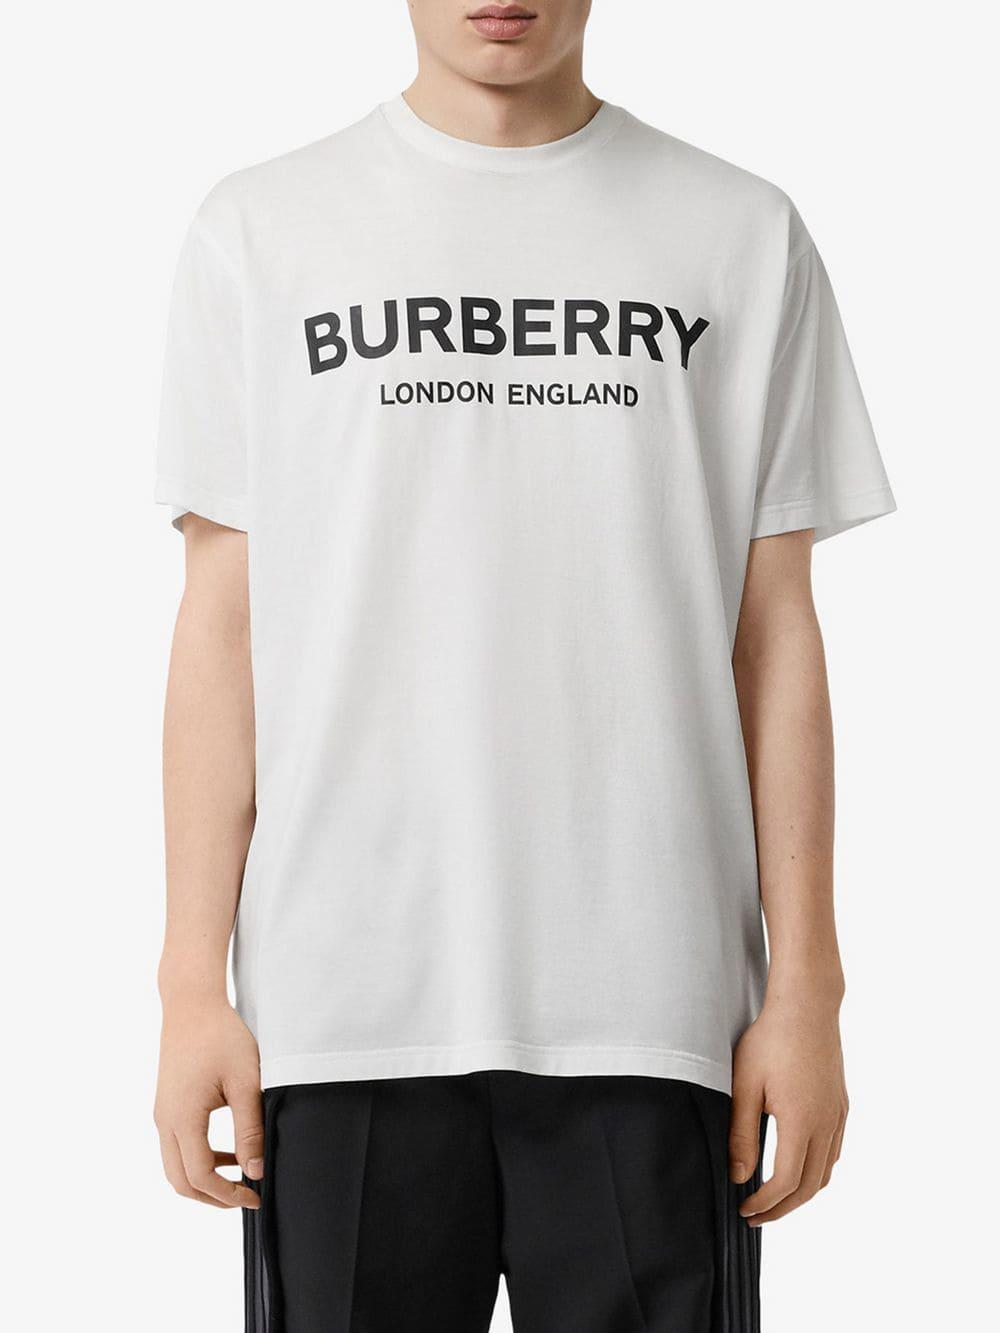 Burberry Cotton Logo Print T-shirt in White for Men - Save 40% - Lyst